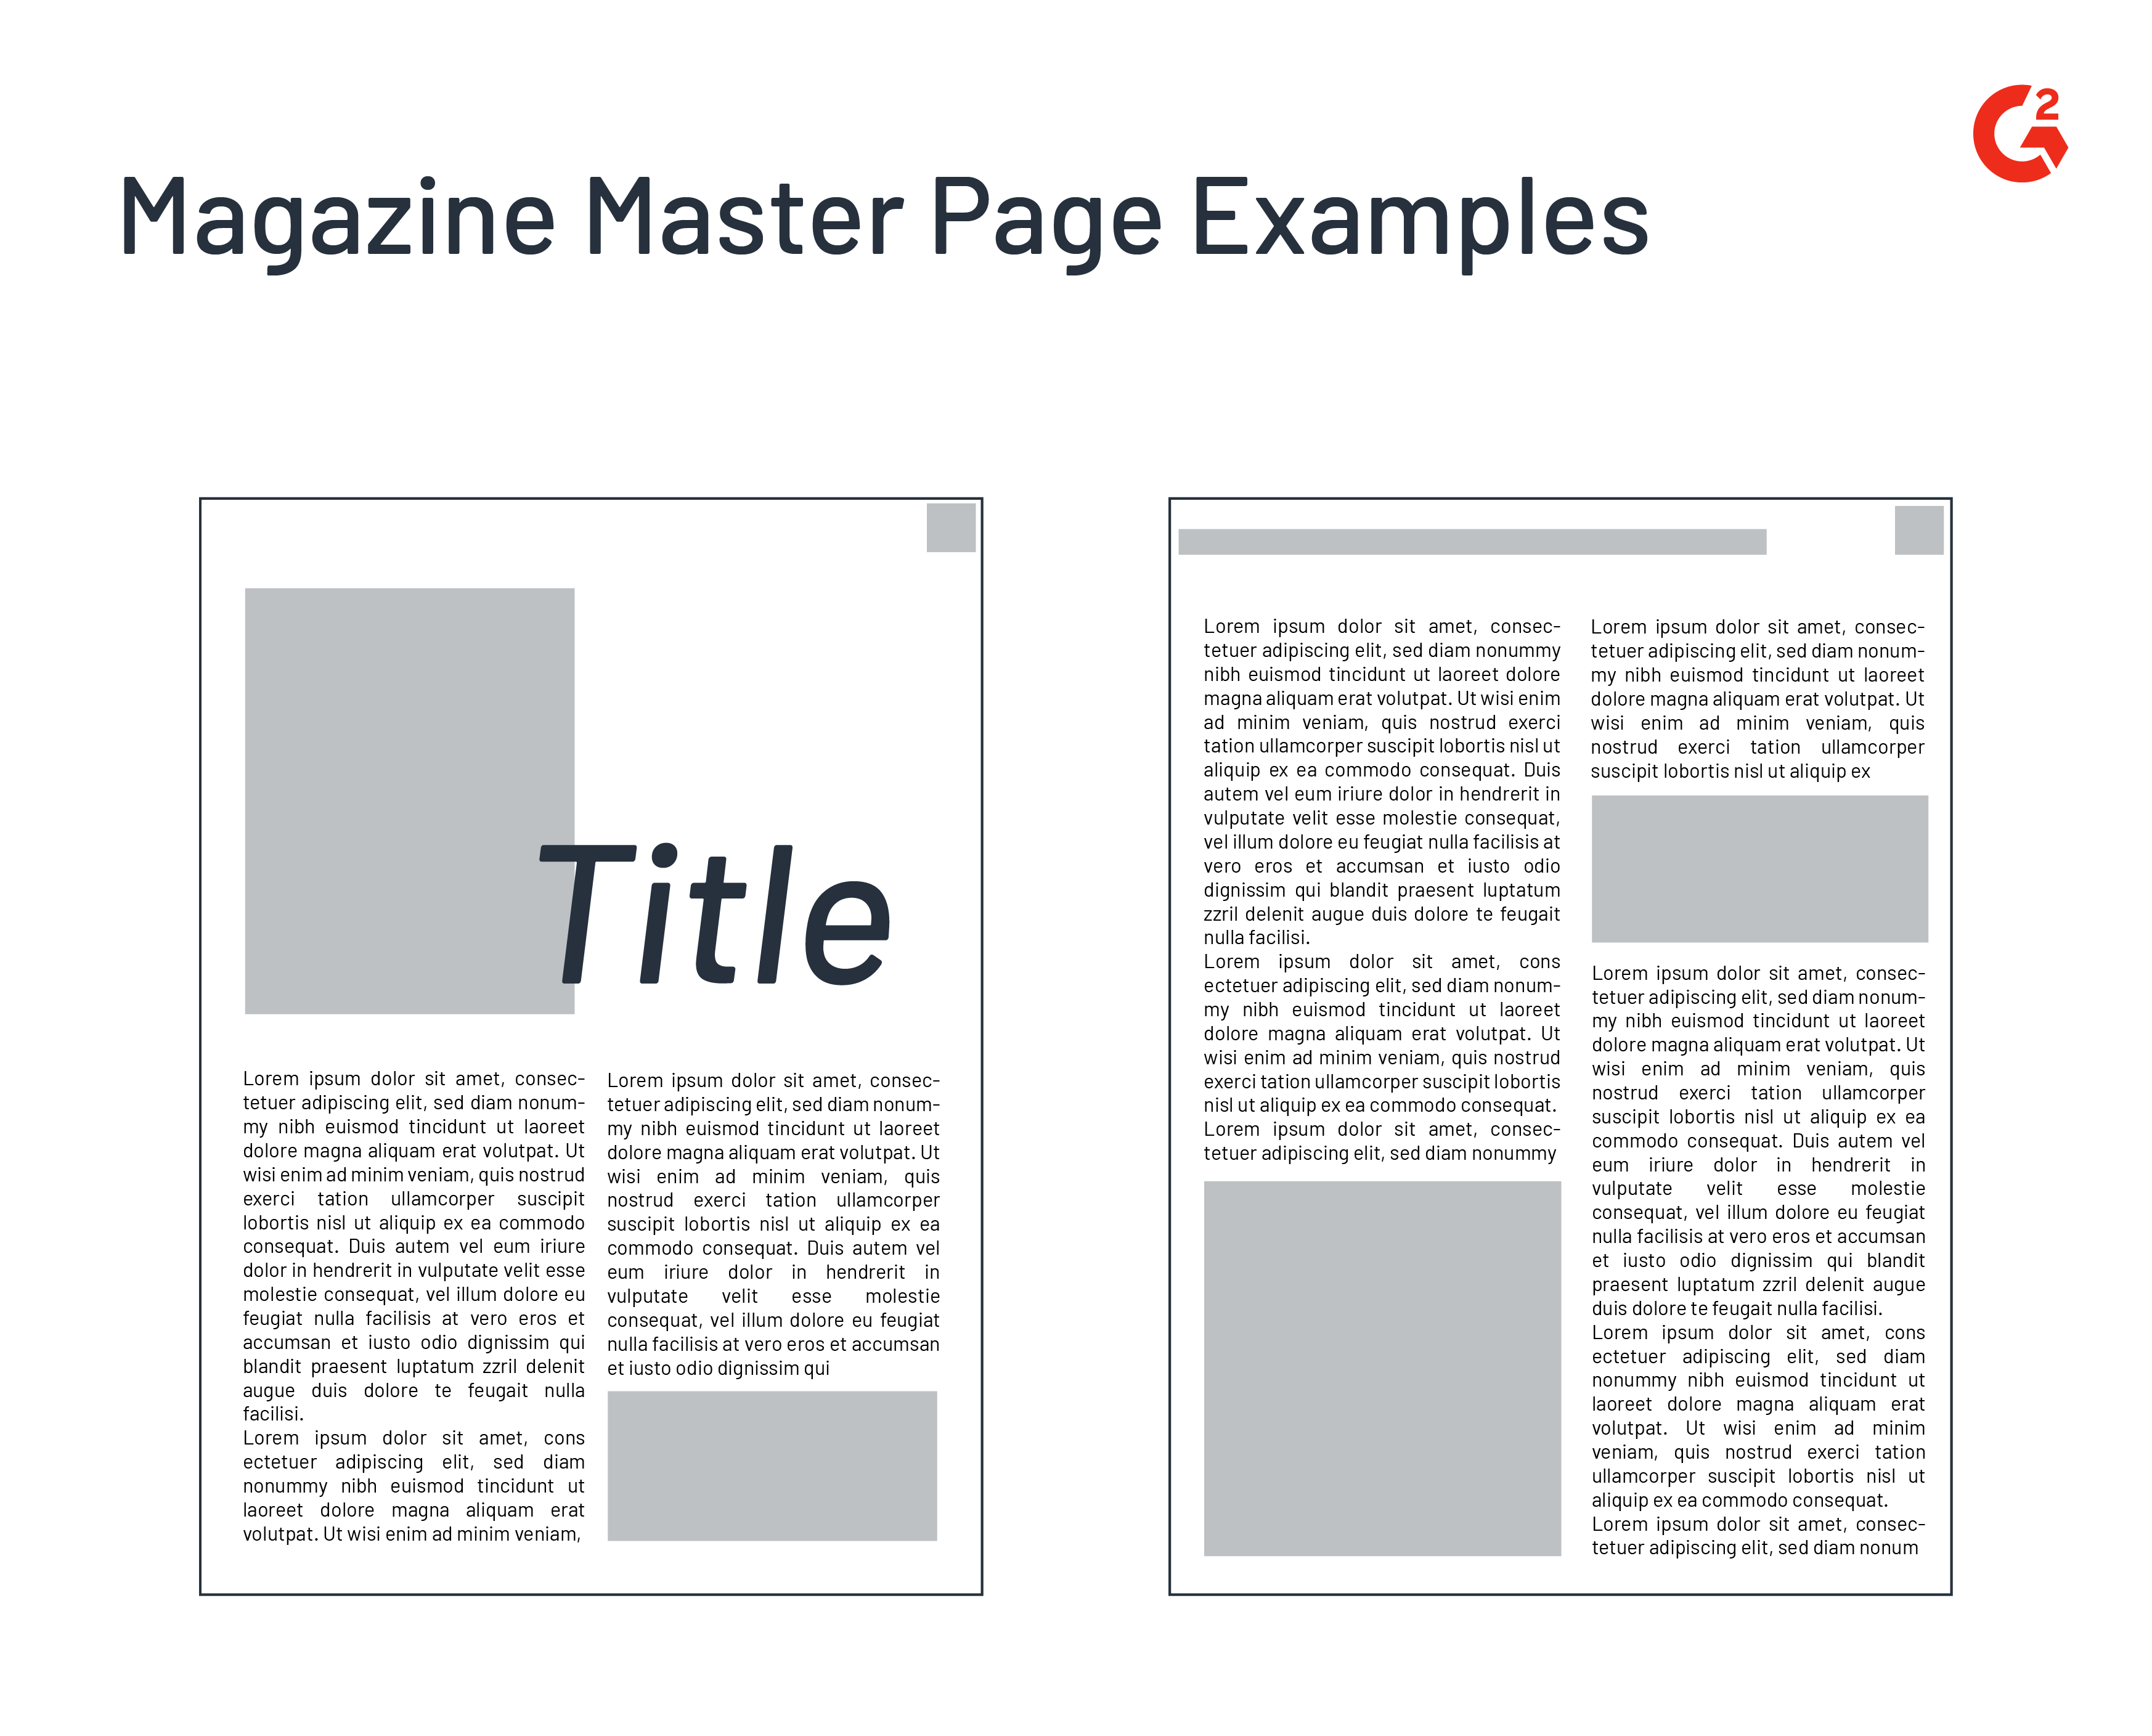 what is the structure of a magazine article